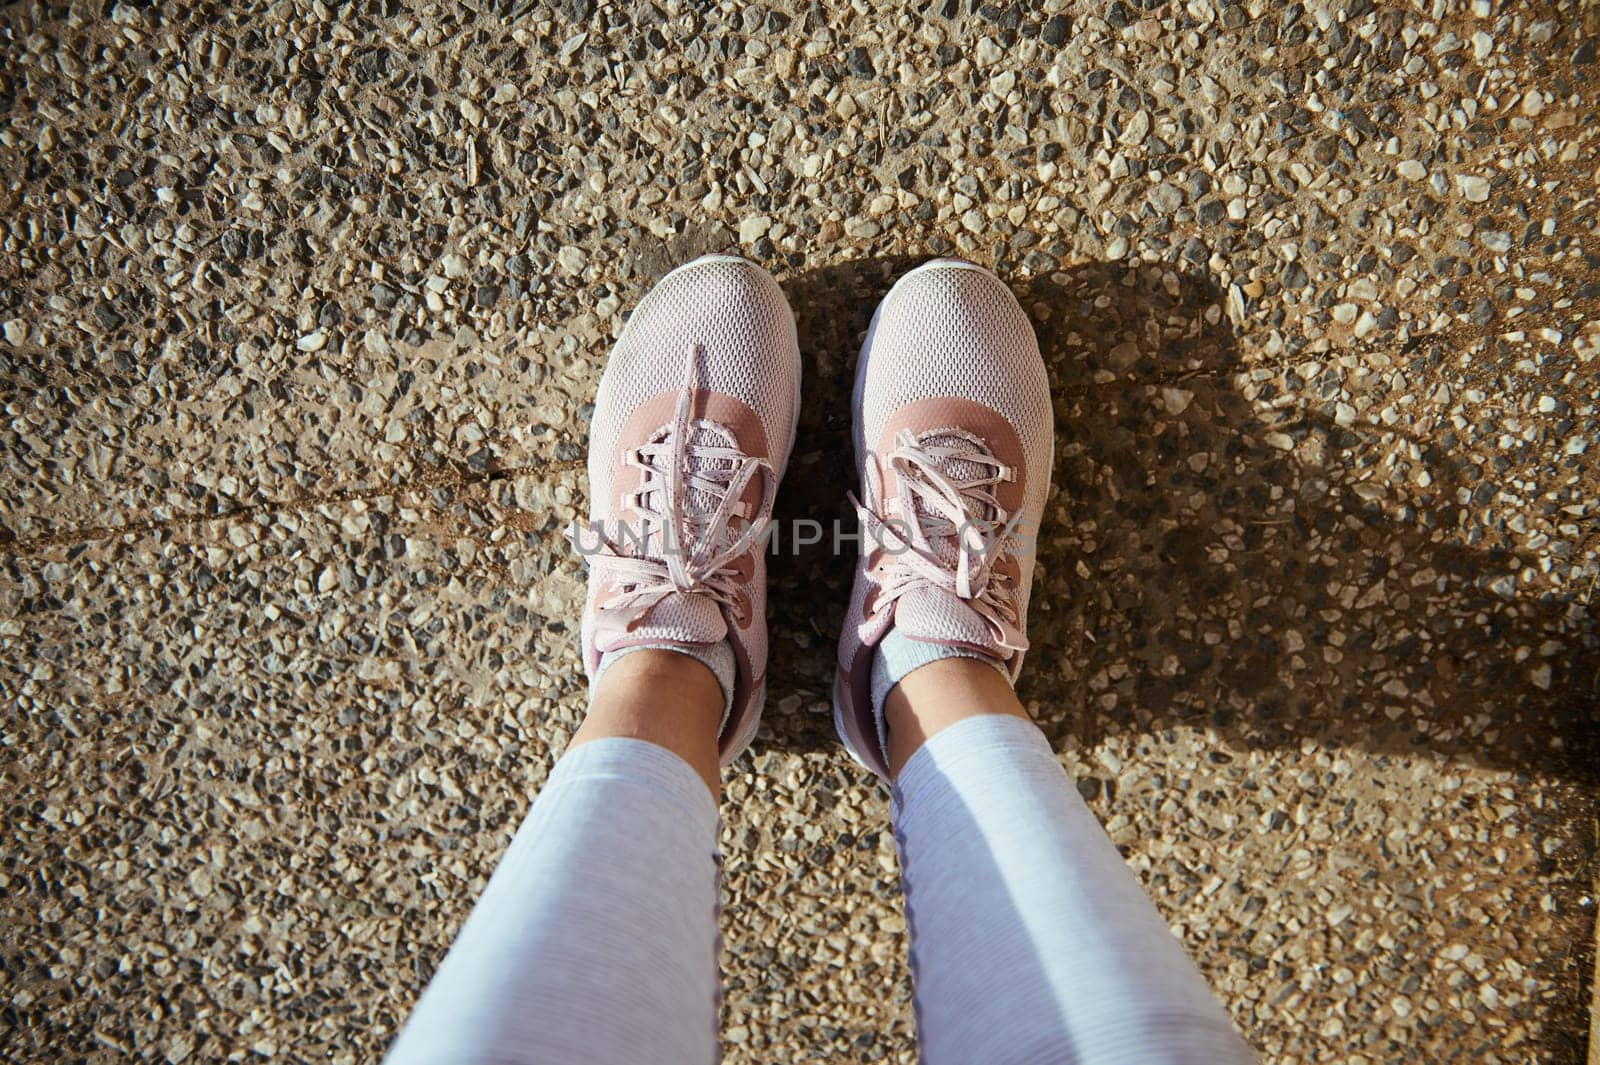 Sportswoman point of view. Legs and feet of female athlete in stylish running sports shoes, pink sneakers on the asphalt by artgf